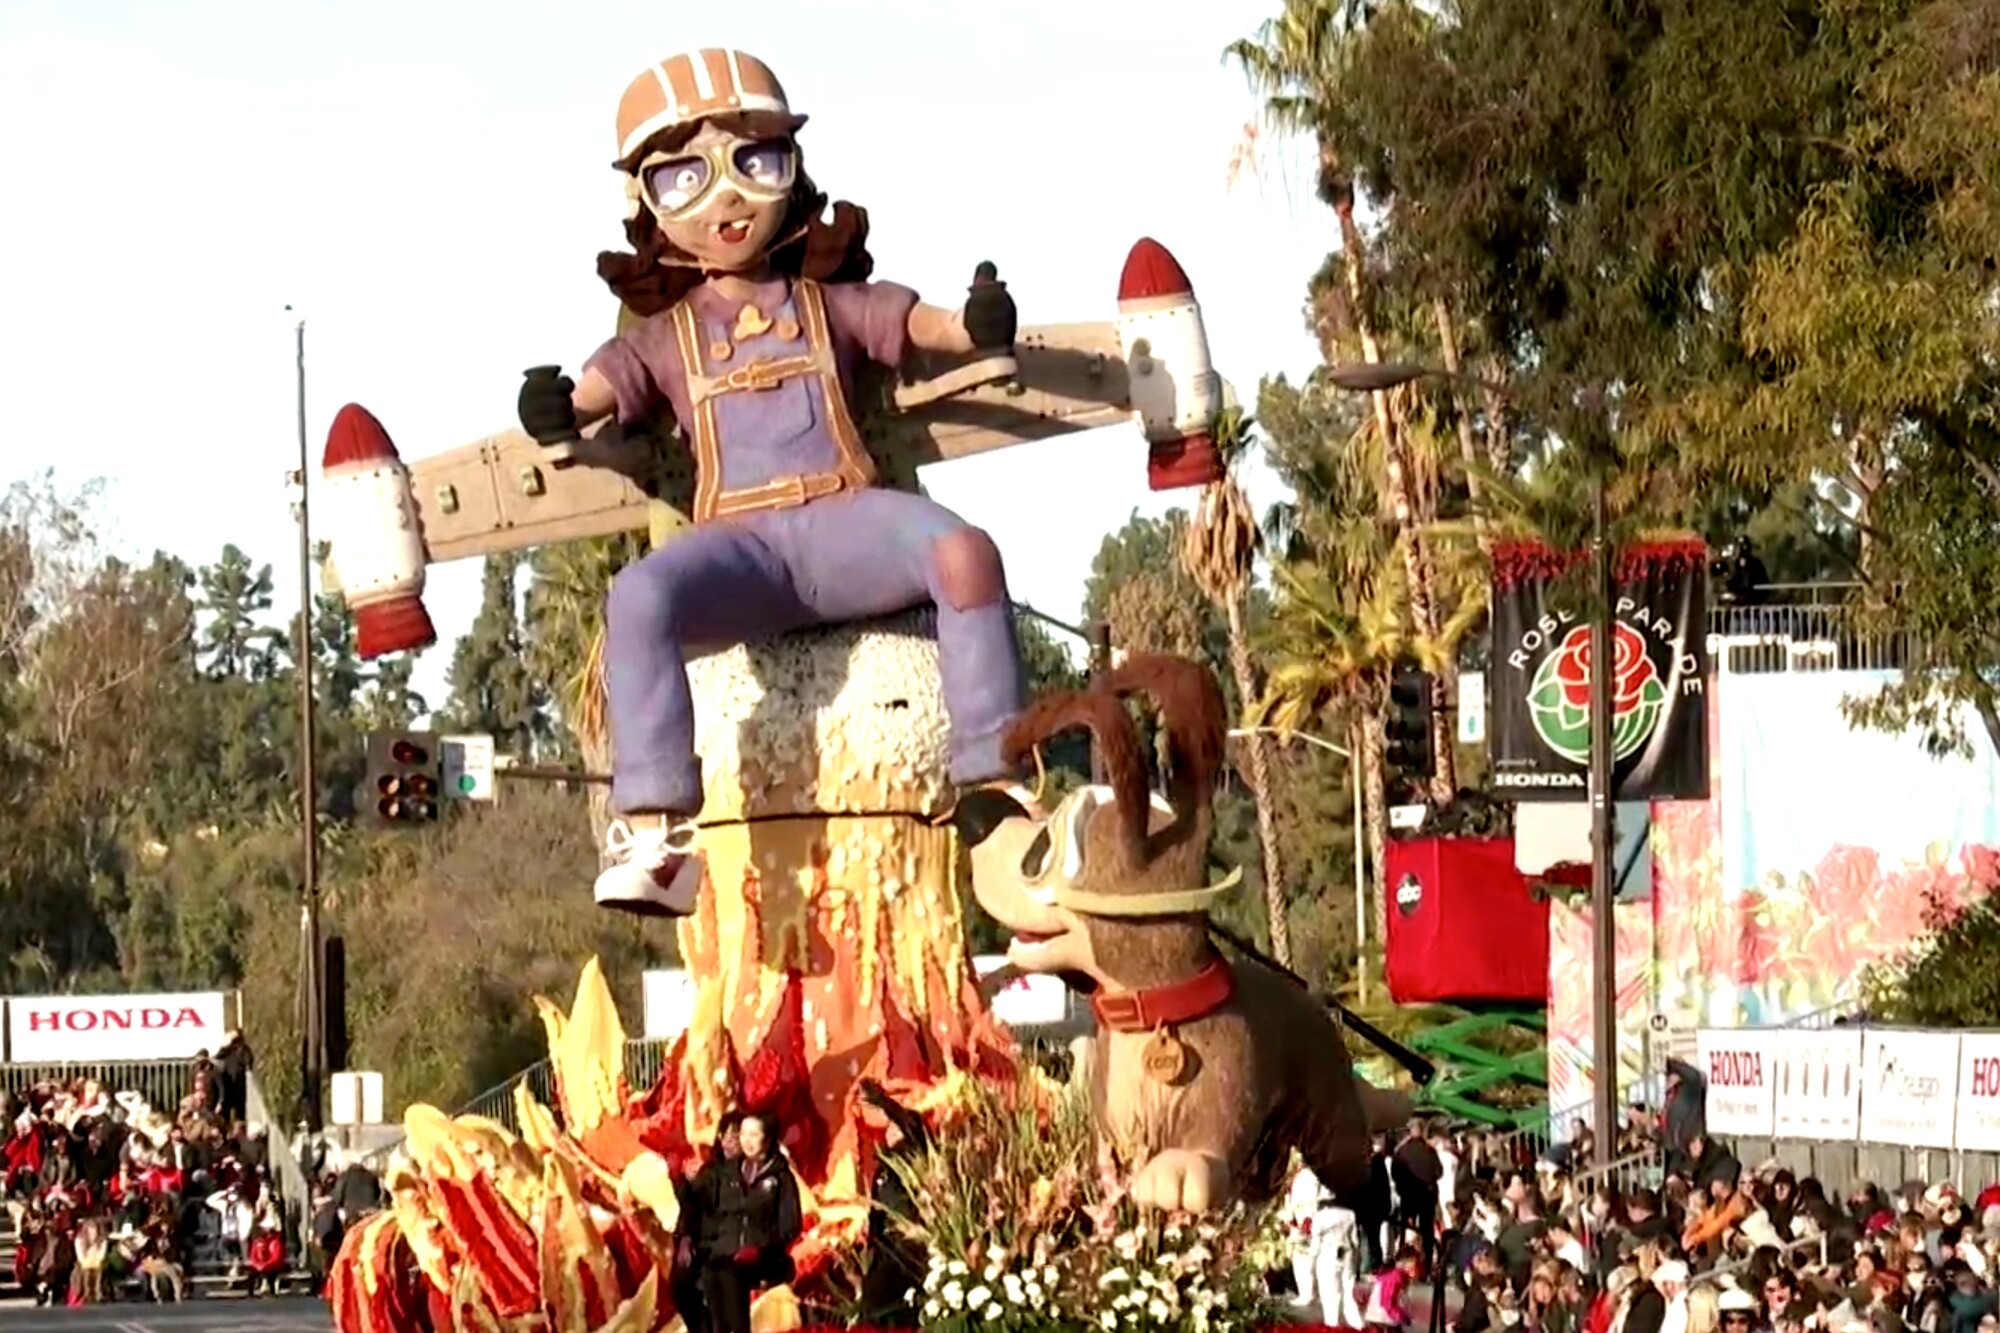 America Honda float shows a girl trying to achieve liftoff with a homemade rocket on her back